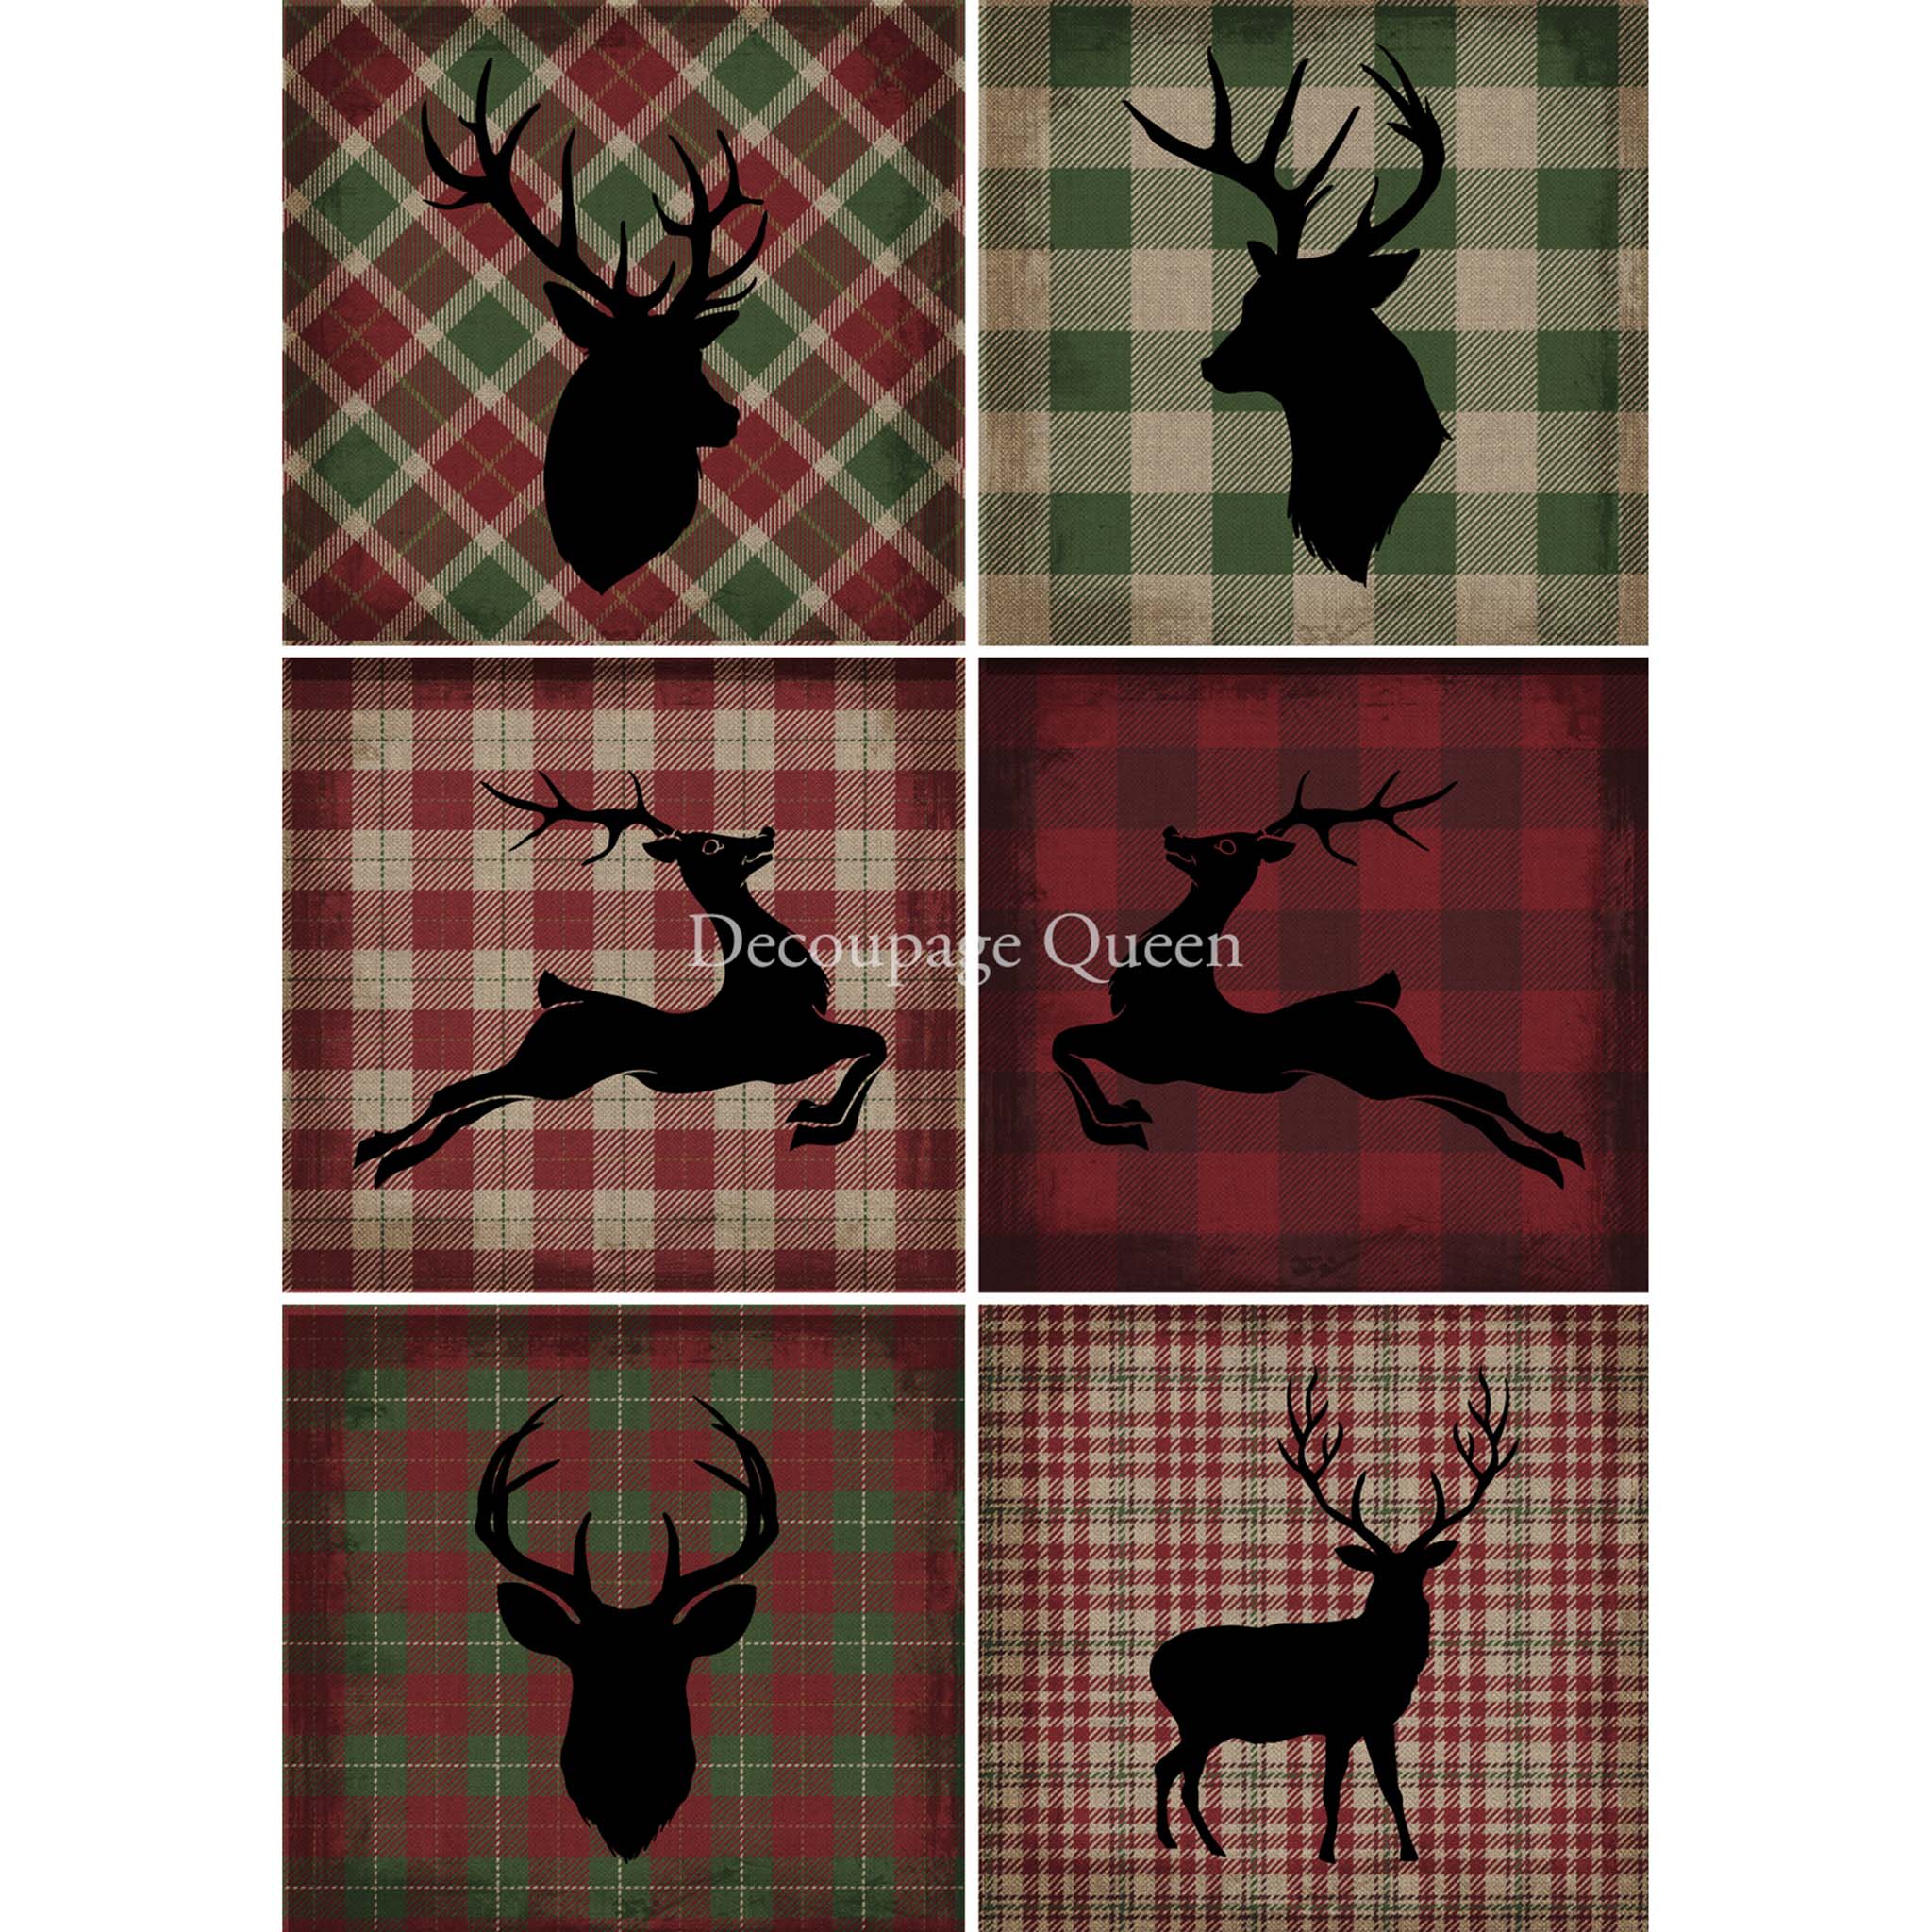 A3 rice paper that features 6 festive green and red plaid squares each with silhouettes of reindeer. White borders are on both sides.